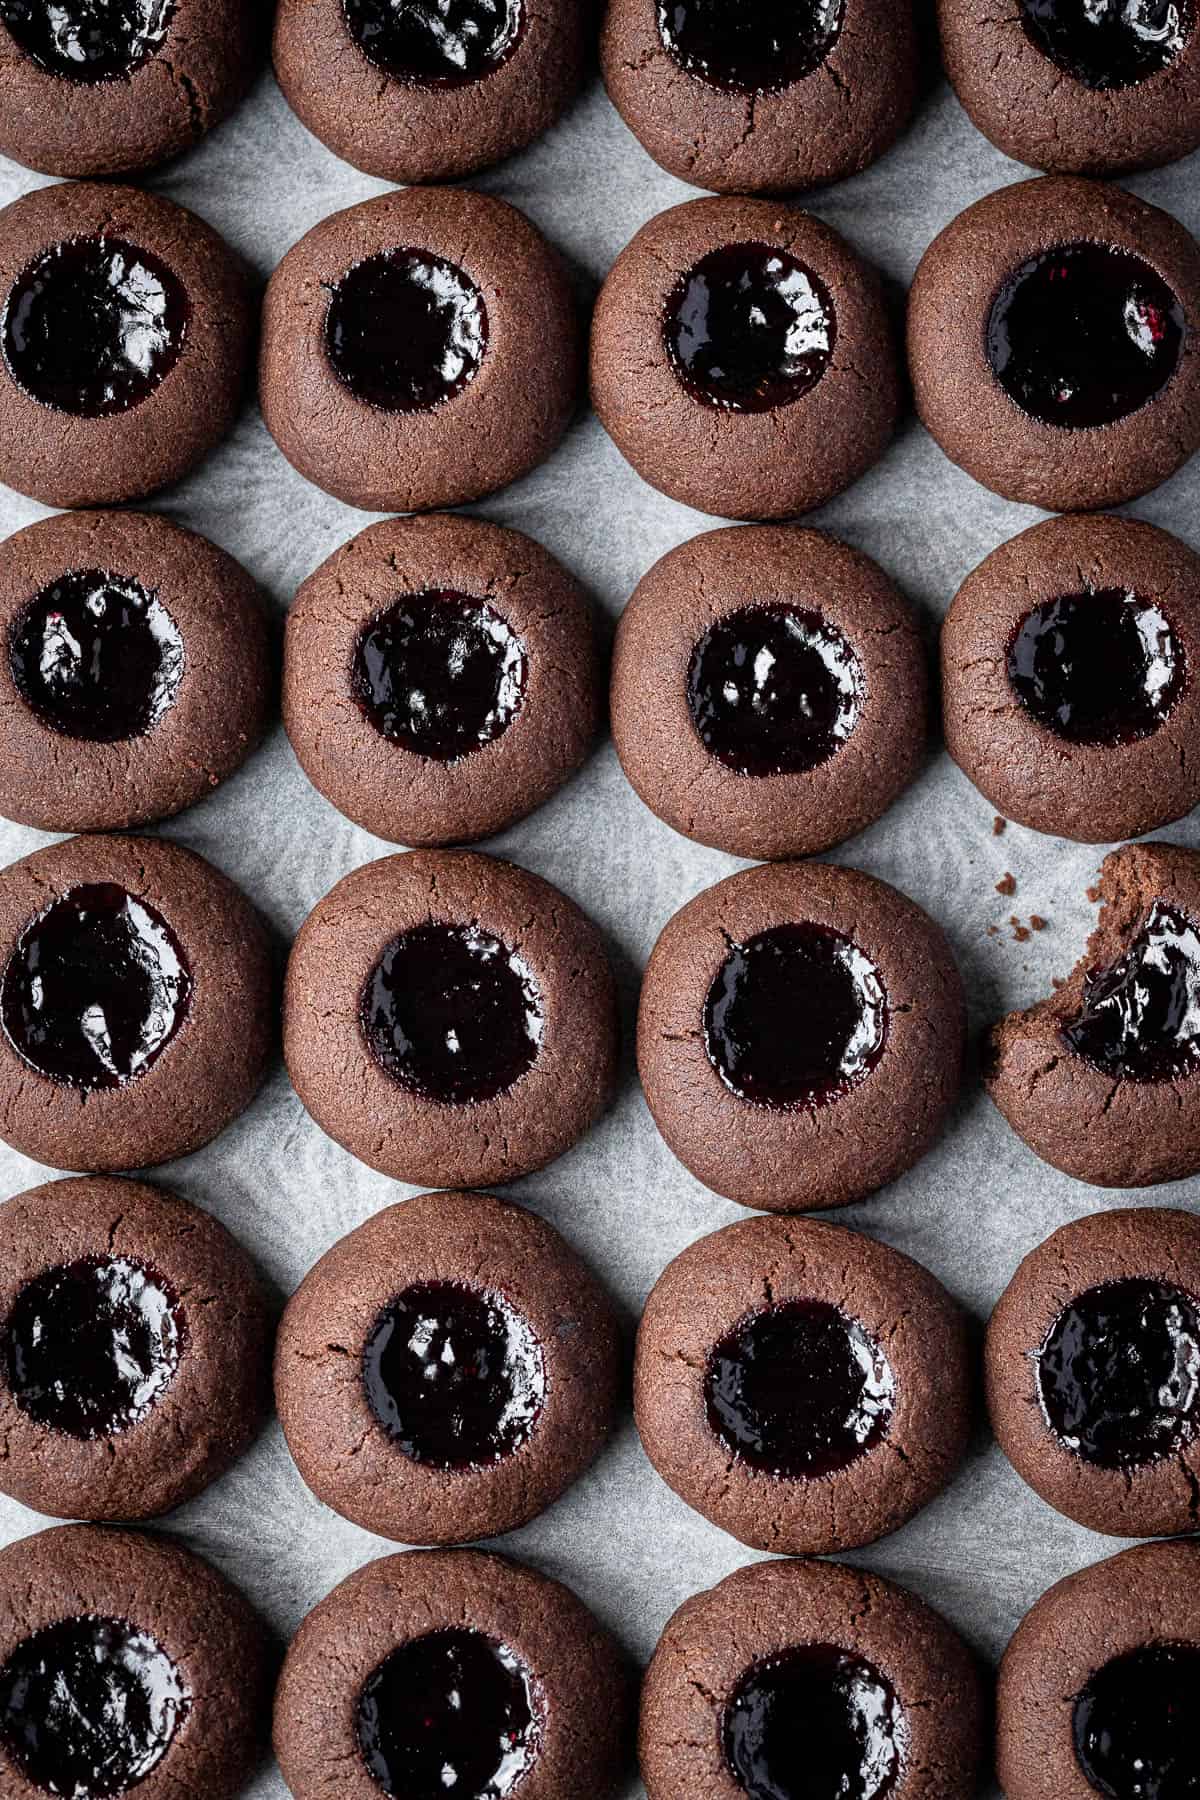 Rows of chocolate cherry thumbprint cookies.